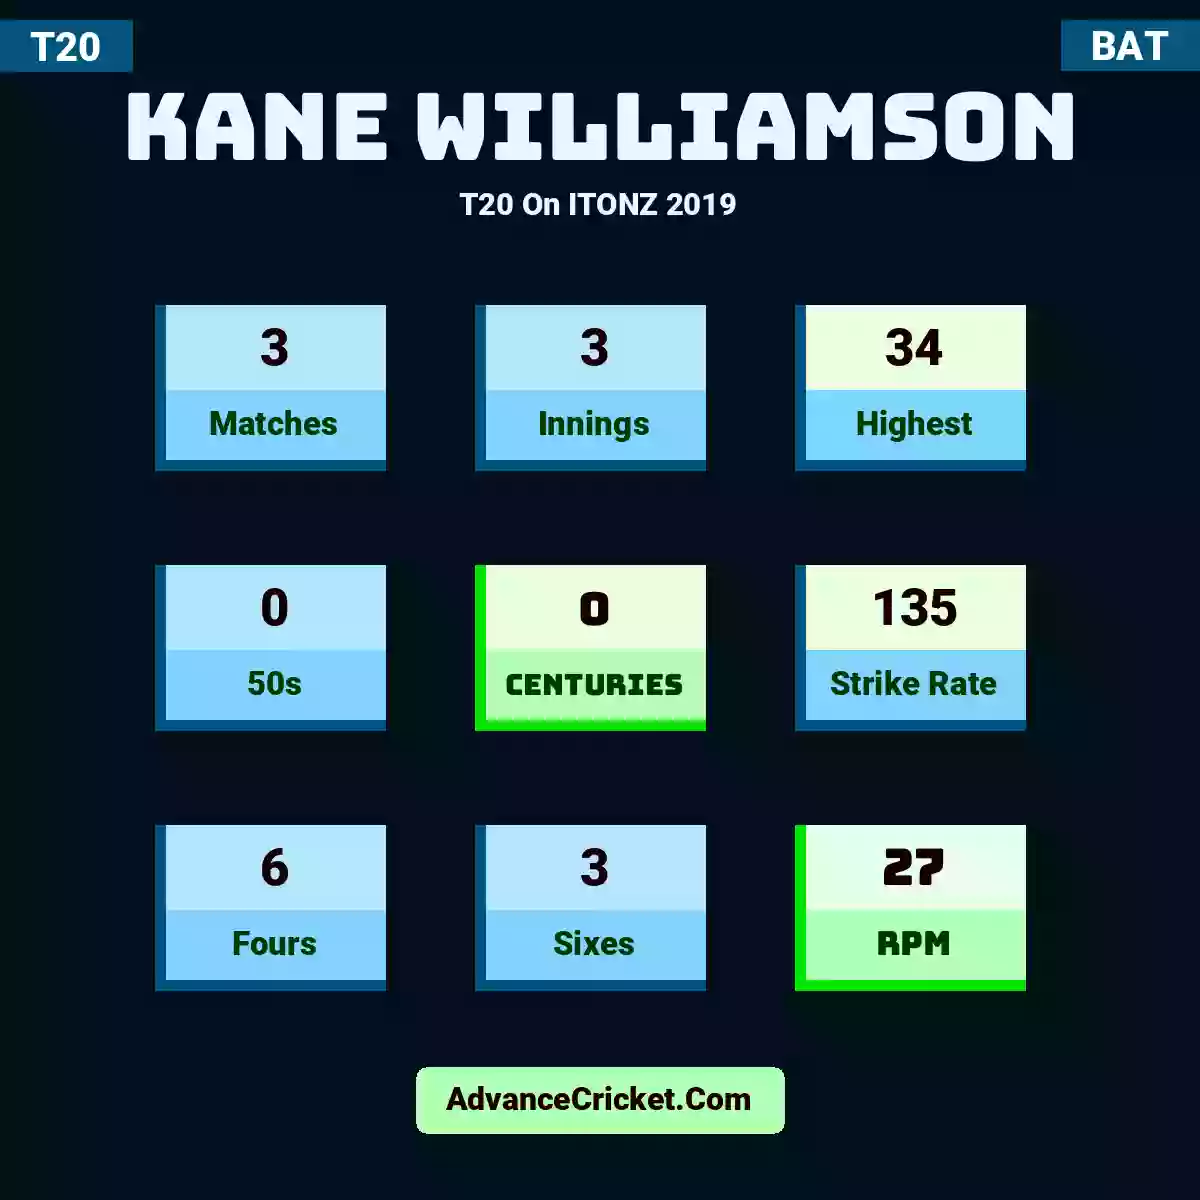 Kane Williamson T20  On ITONZ 2019, Kane Williamson played 3 matches, scored 34 runs as highest, 0 half-centuries, and 0 centuries, with a strike rate of 135. K.Williamson hit 6 fours and 3 sixes, with an RPM of 27.